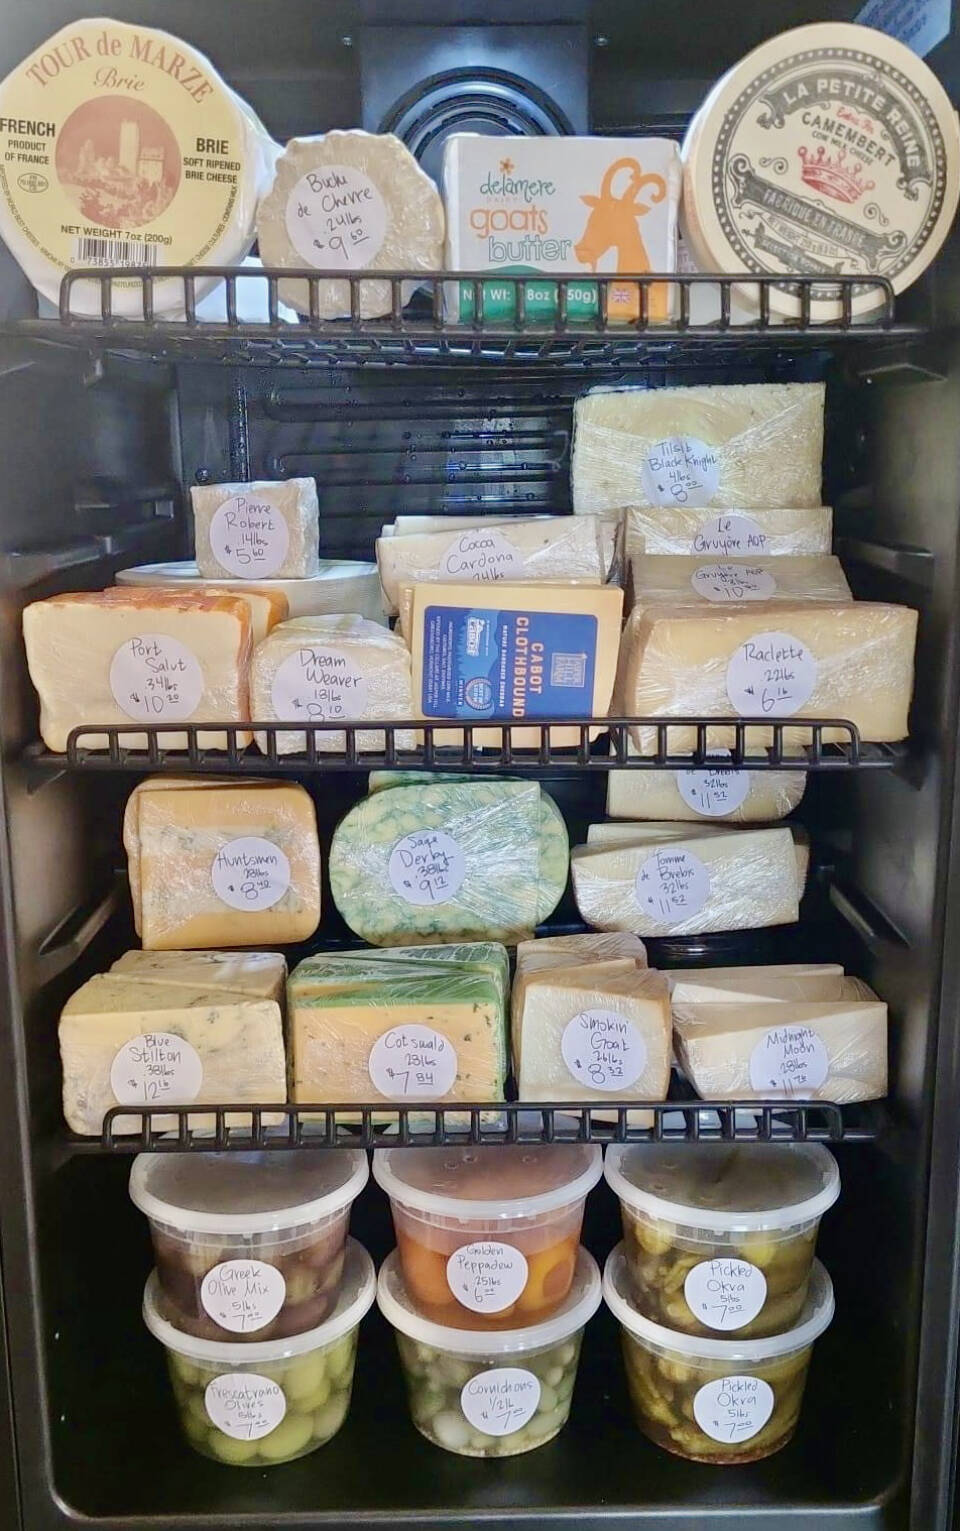 An assortment of cheeses, olives and other specialty items that rotate through Alasandro’s Market on Heath Street is on display at the shop. Photo courtesy of Jacob Chrisman